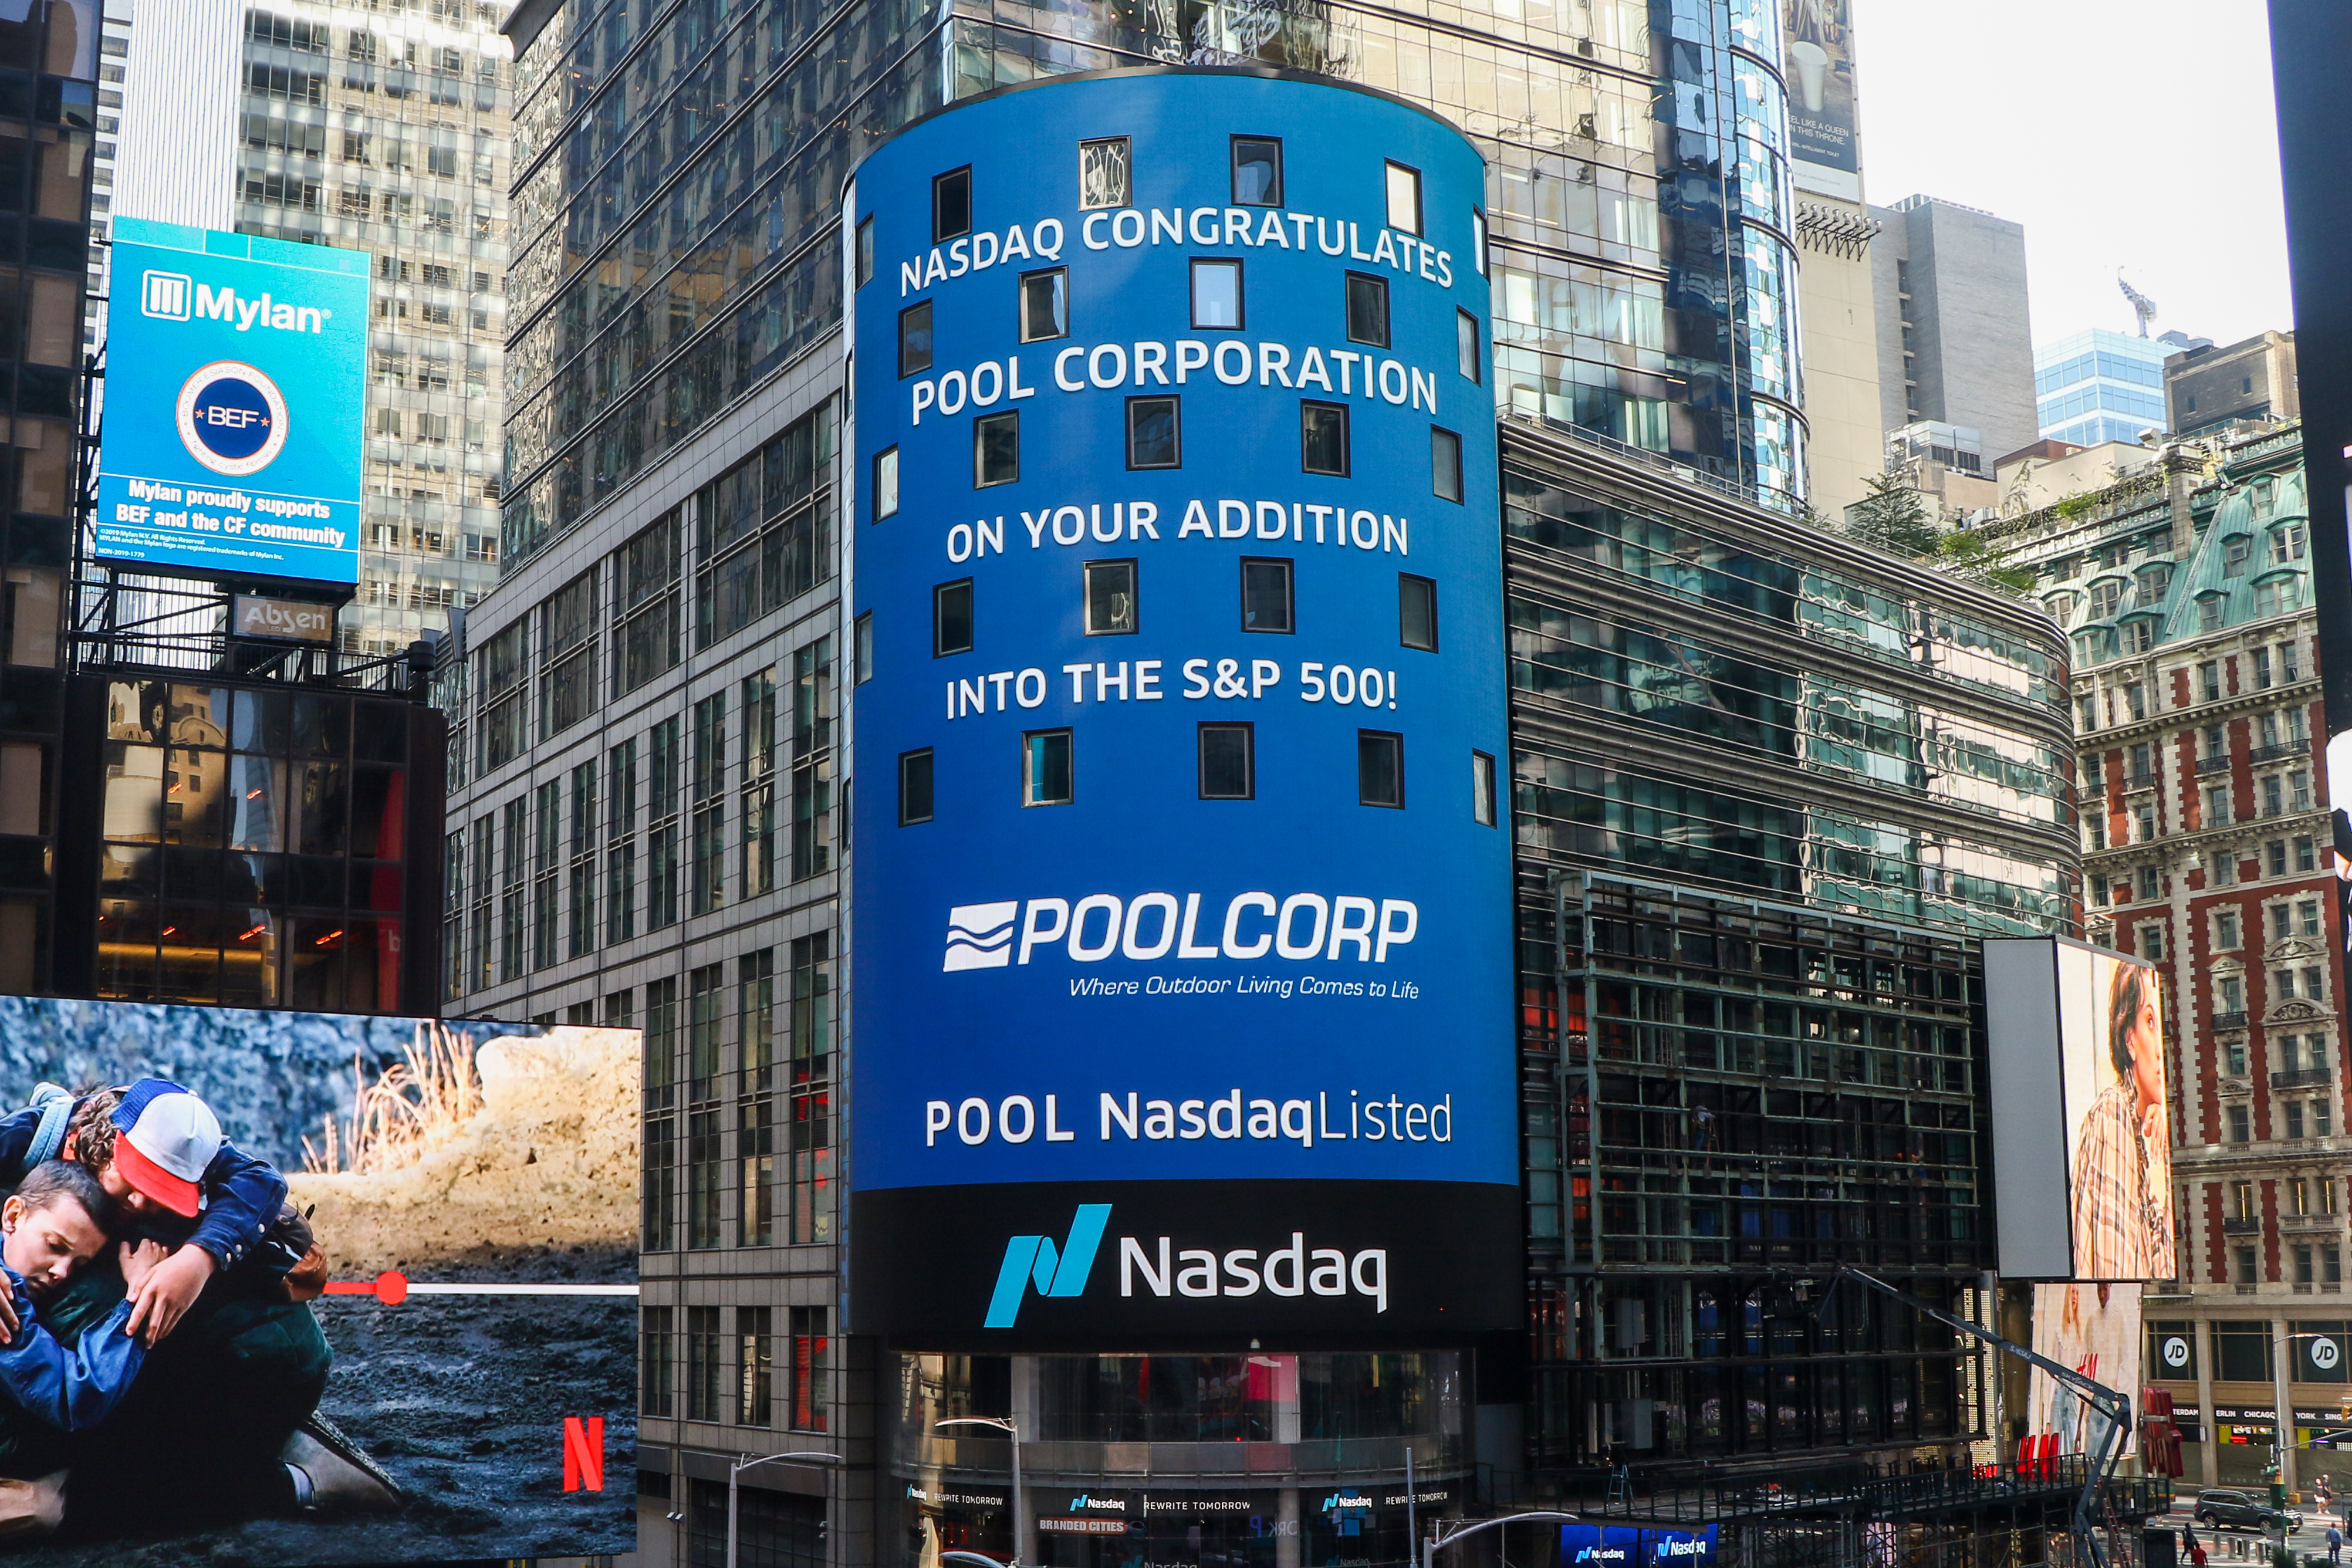 NASDAQ Congratulates POOLCORP on our Addition to the S&P 500